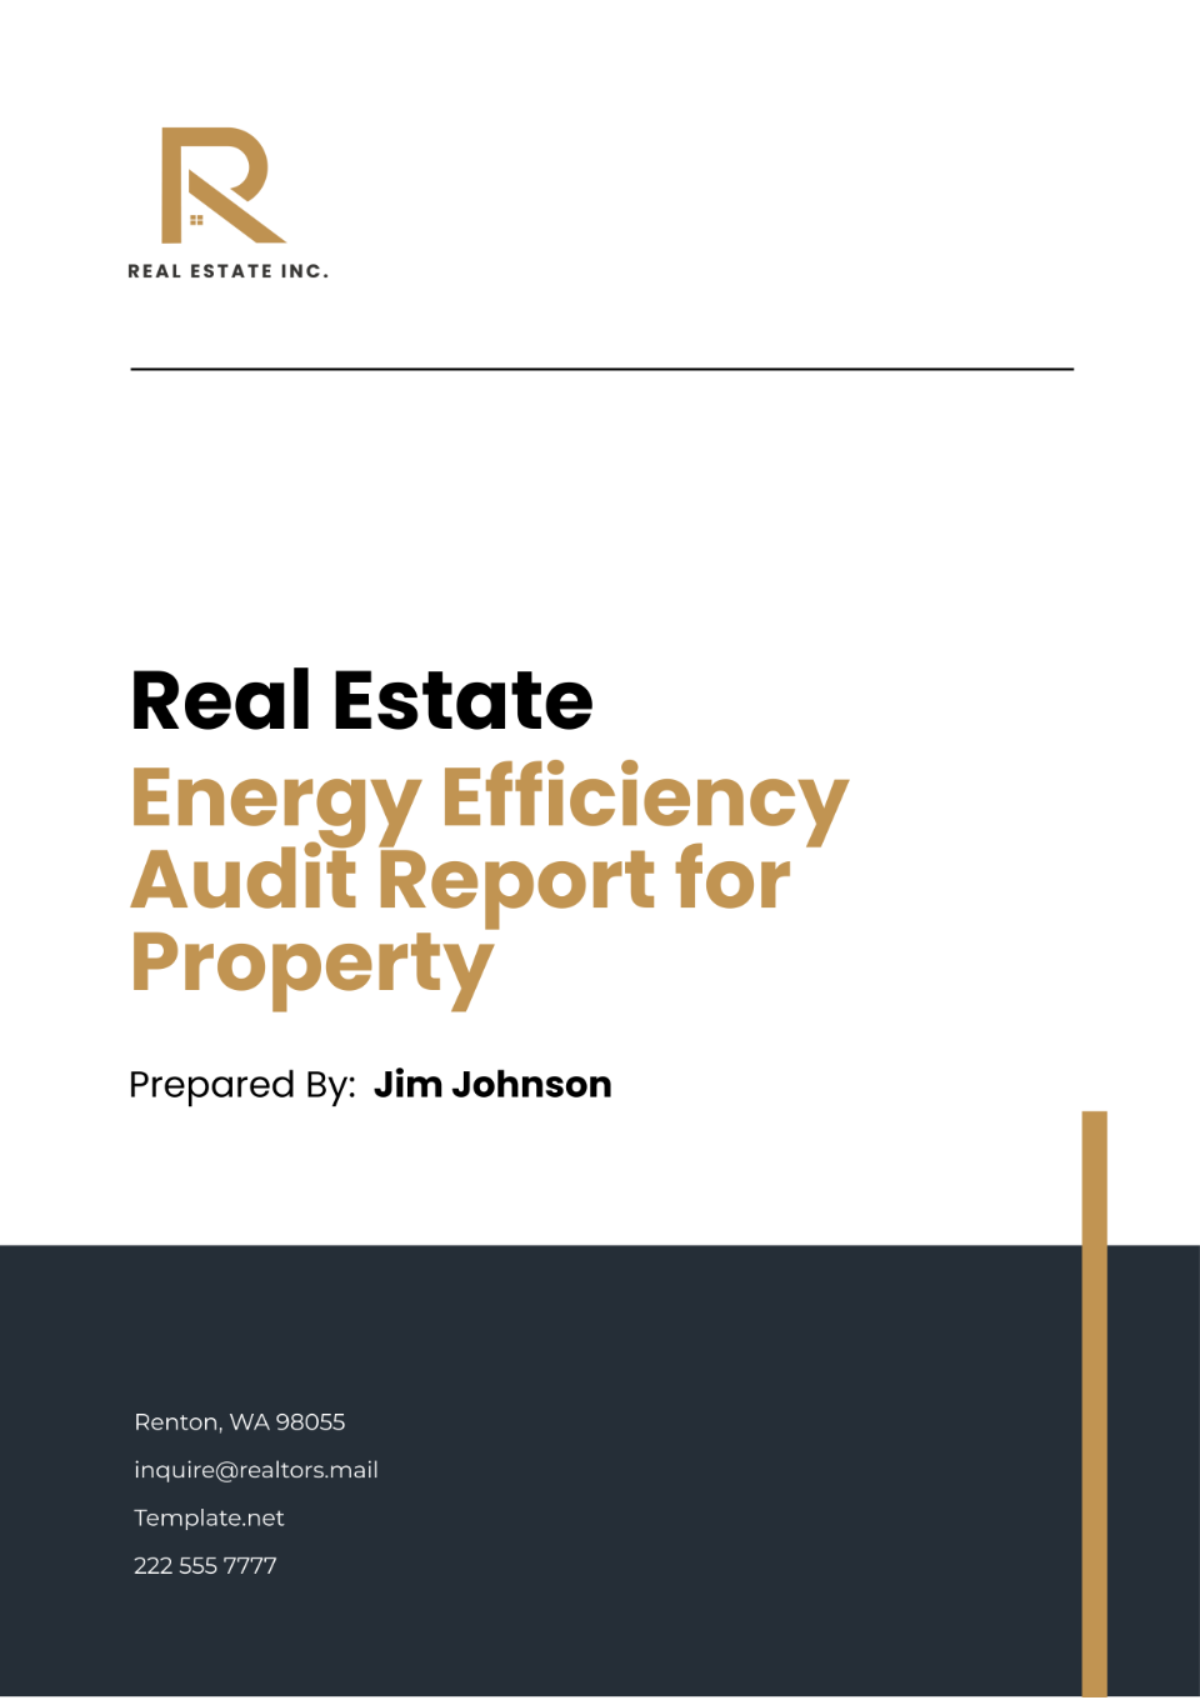 Real Estate Energy Efficiency Audit Report for Property Template